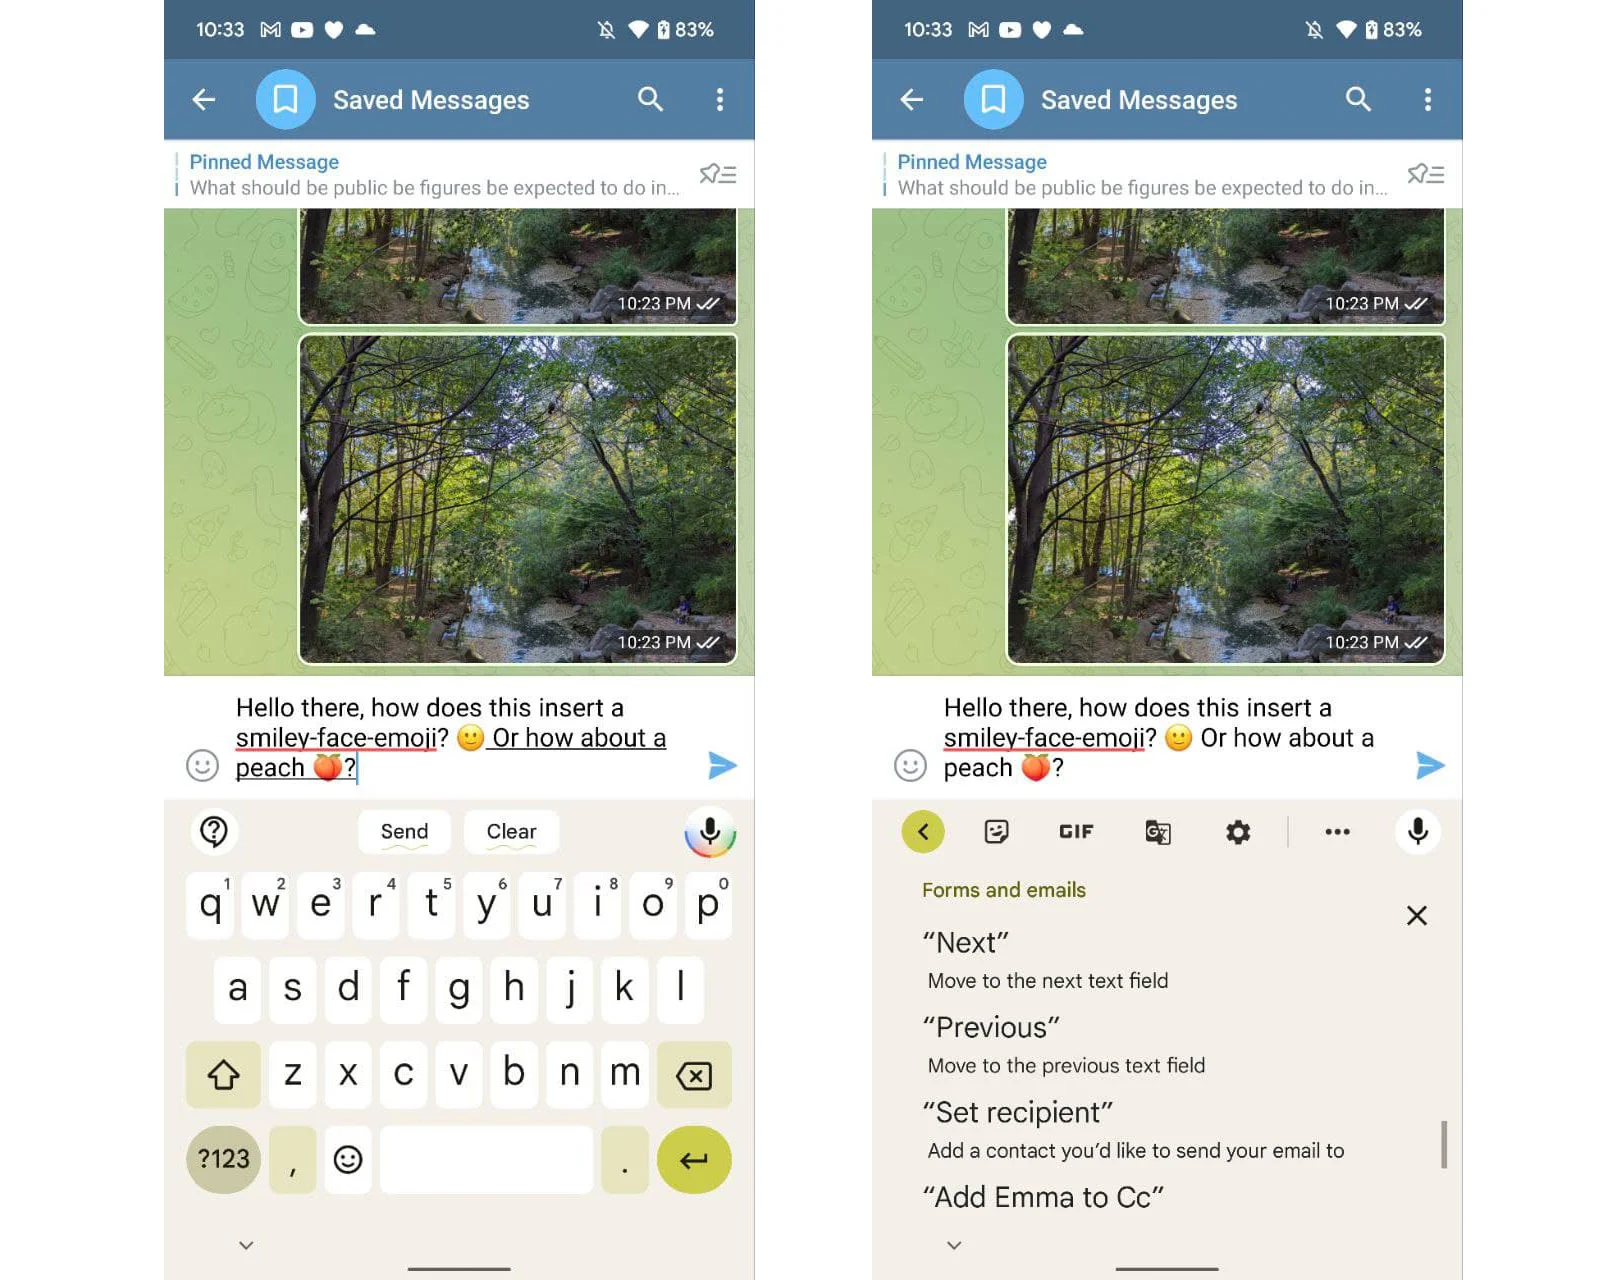 Screenshots showing examples of the new voice keyboard on the Pixel 6, as well as the help page showing more commands that can be used, like 